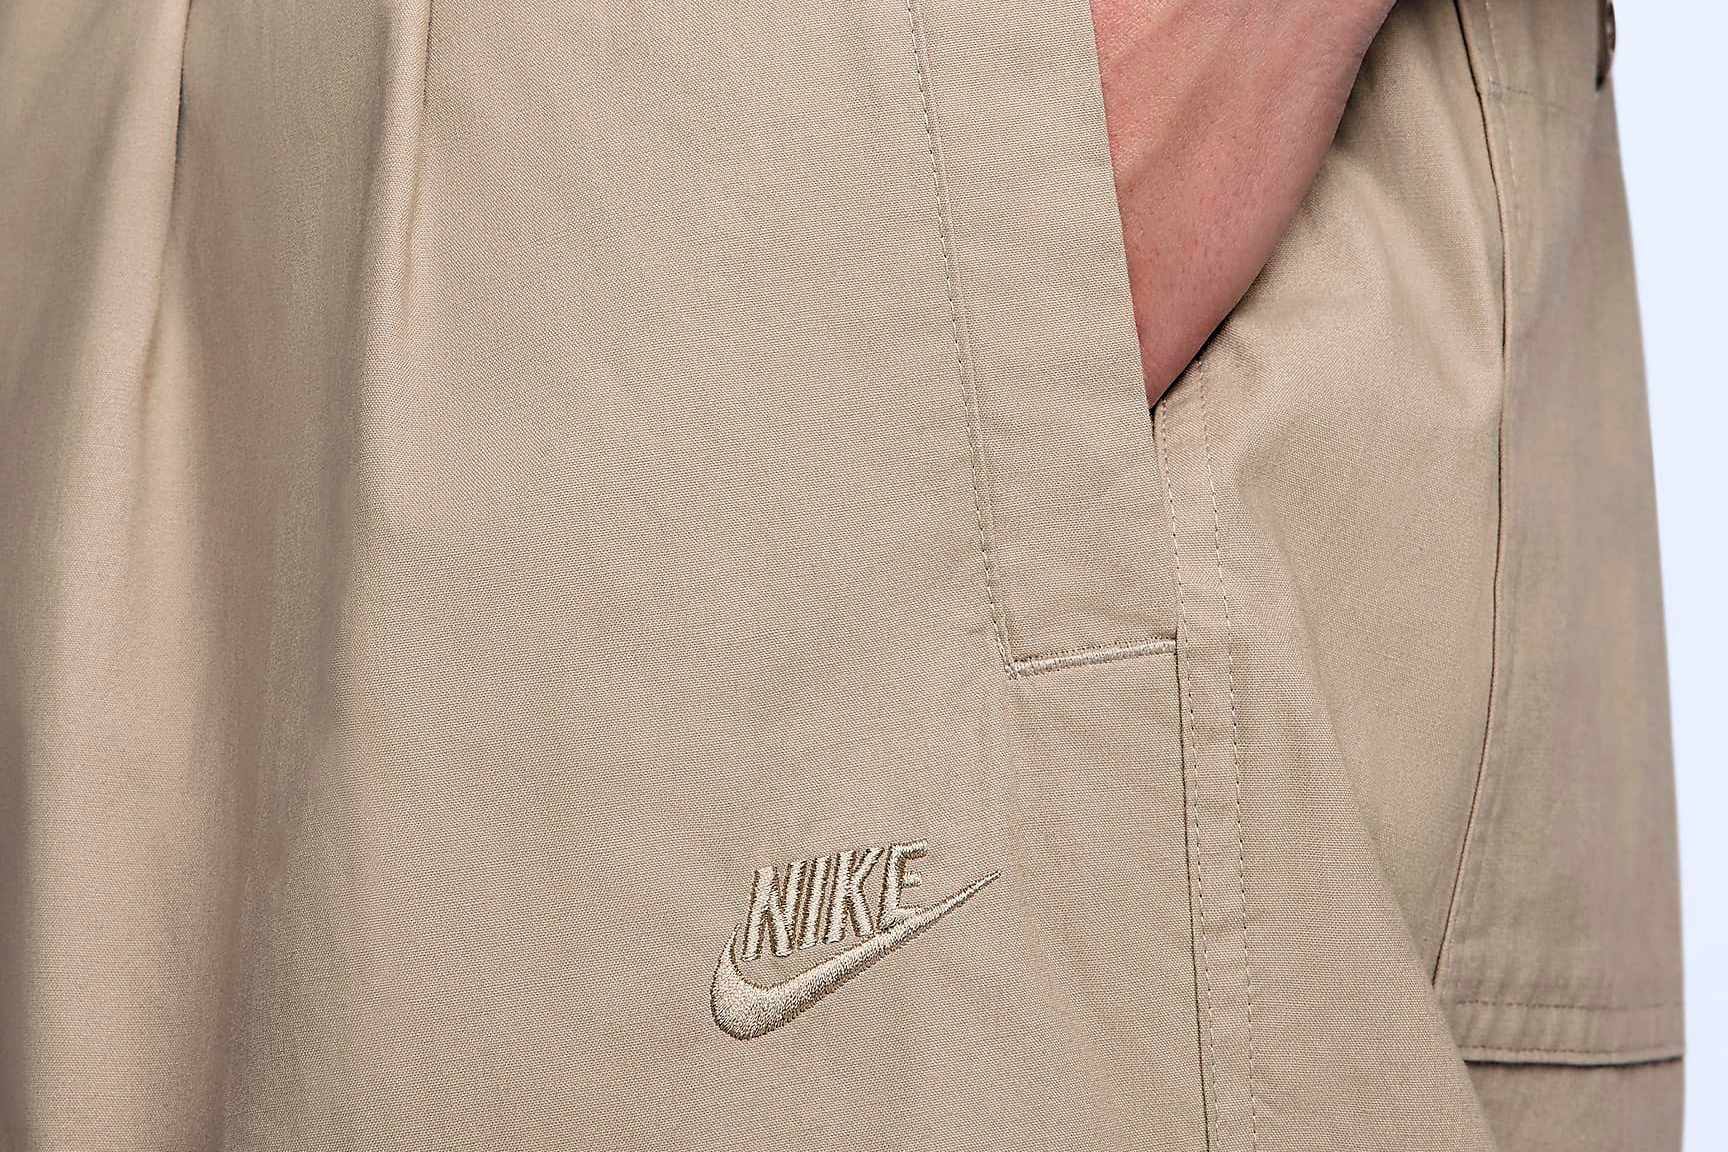 Nike Balloon Pant in beige and black colorways, with an elastic waist, pleats and loose leg